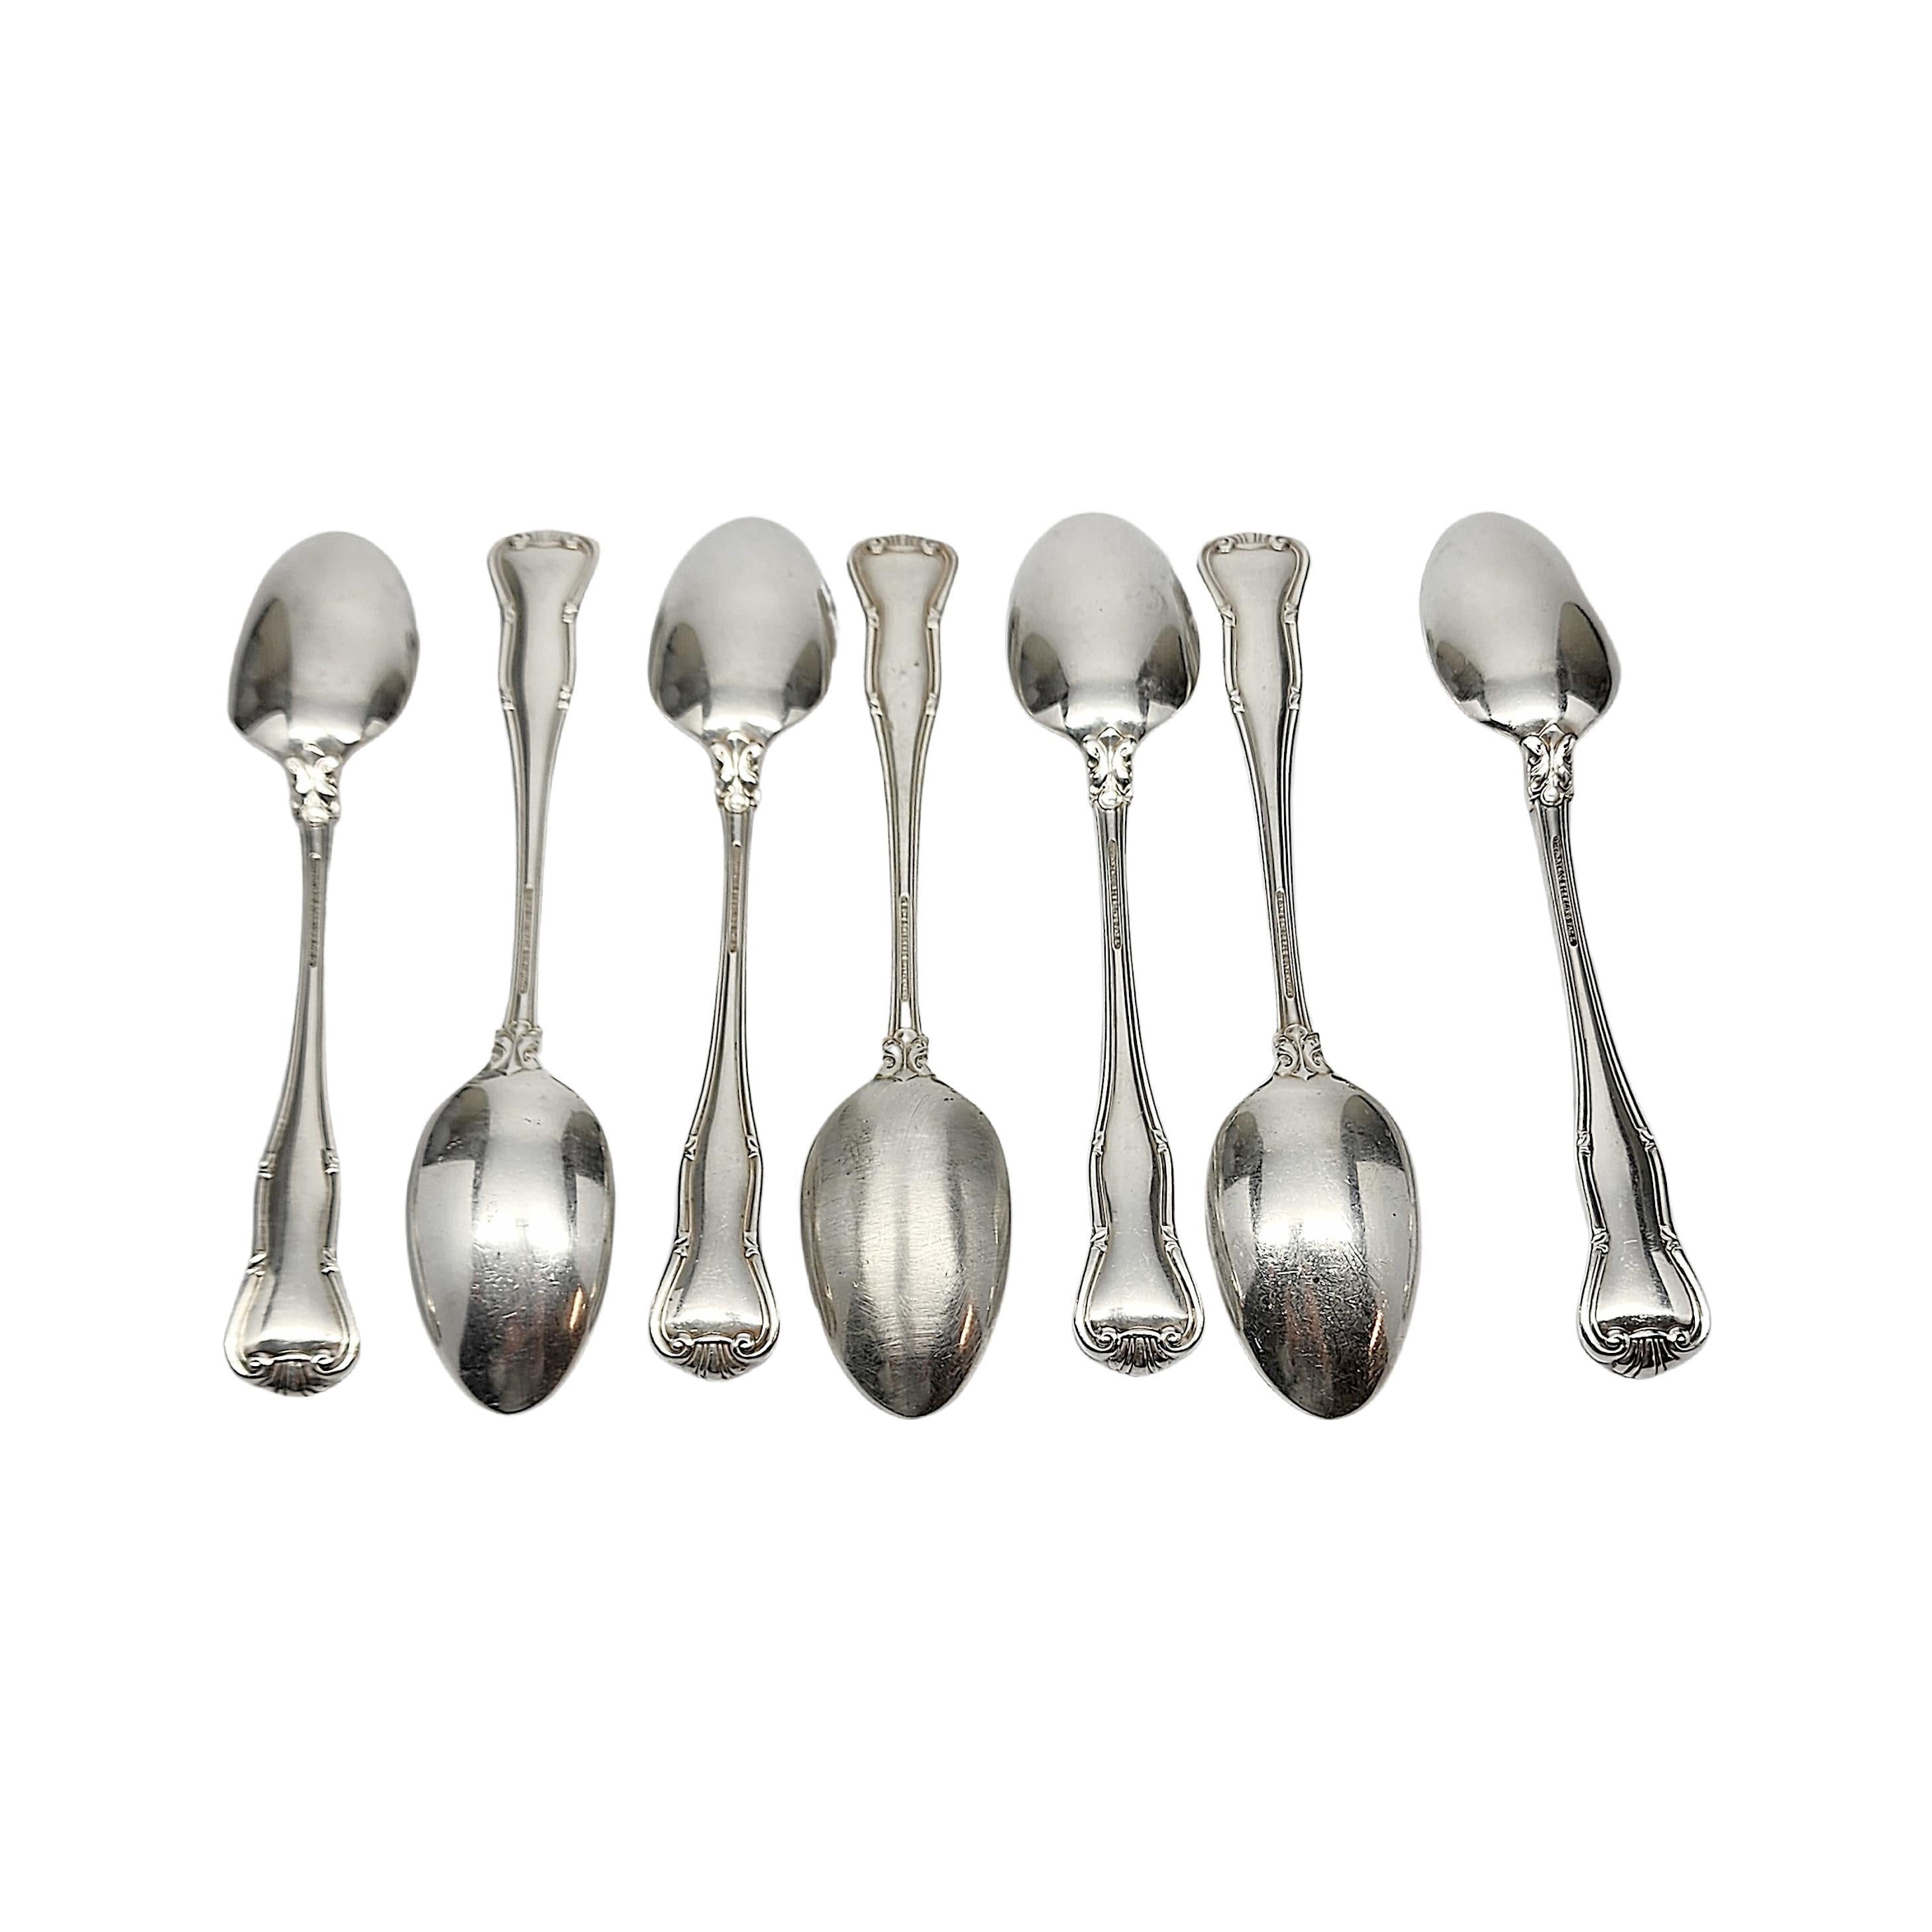 Set of 7 sterling silver teaspoons by Tiffany & Co in the Provence pattern with monogram.

Monogram appears to be U

Introduced in 1961, the Provence pattern features a crested arch, inspired by 18th Century French motifs. Hallmarks date pieces to